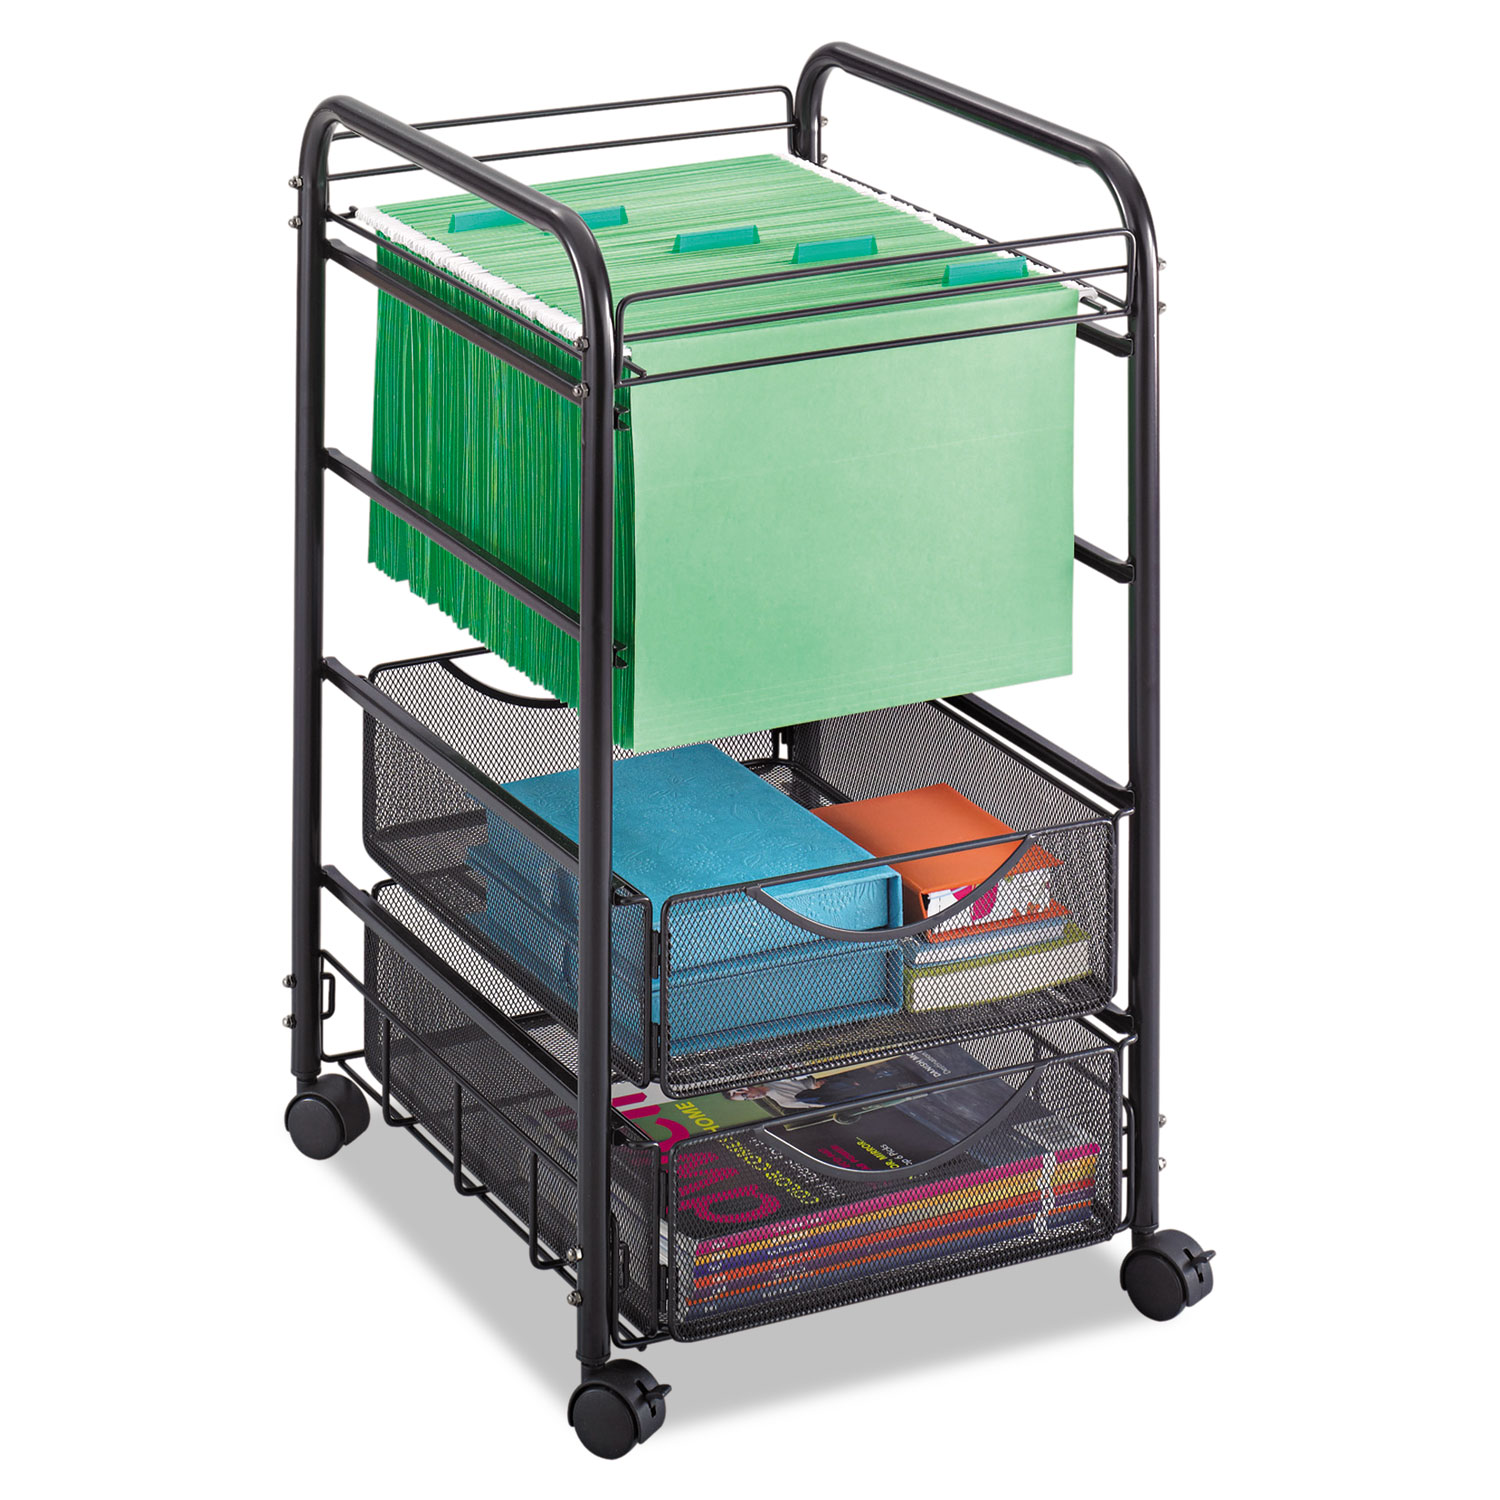  Safco 5215BL Onyx Mesh Open Mobile File, Two-Drawers, 15.75w x 17d x 27h, Black (SAF5215BL) 